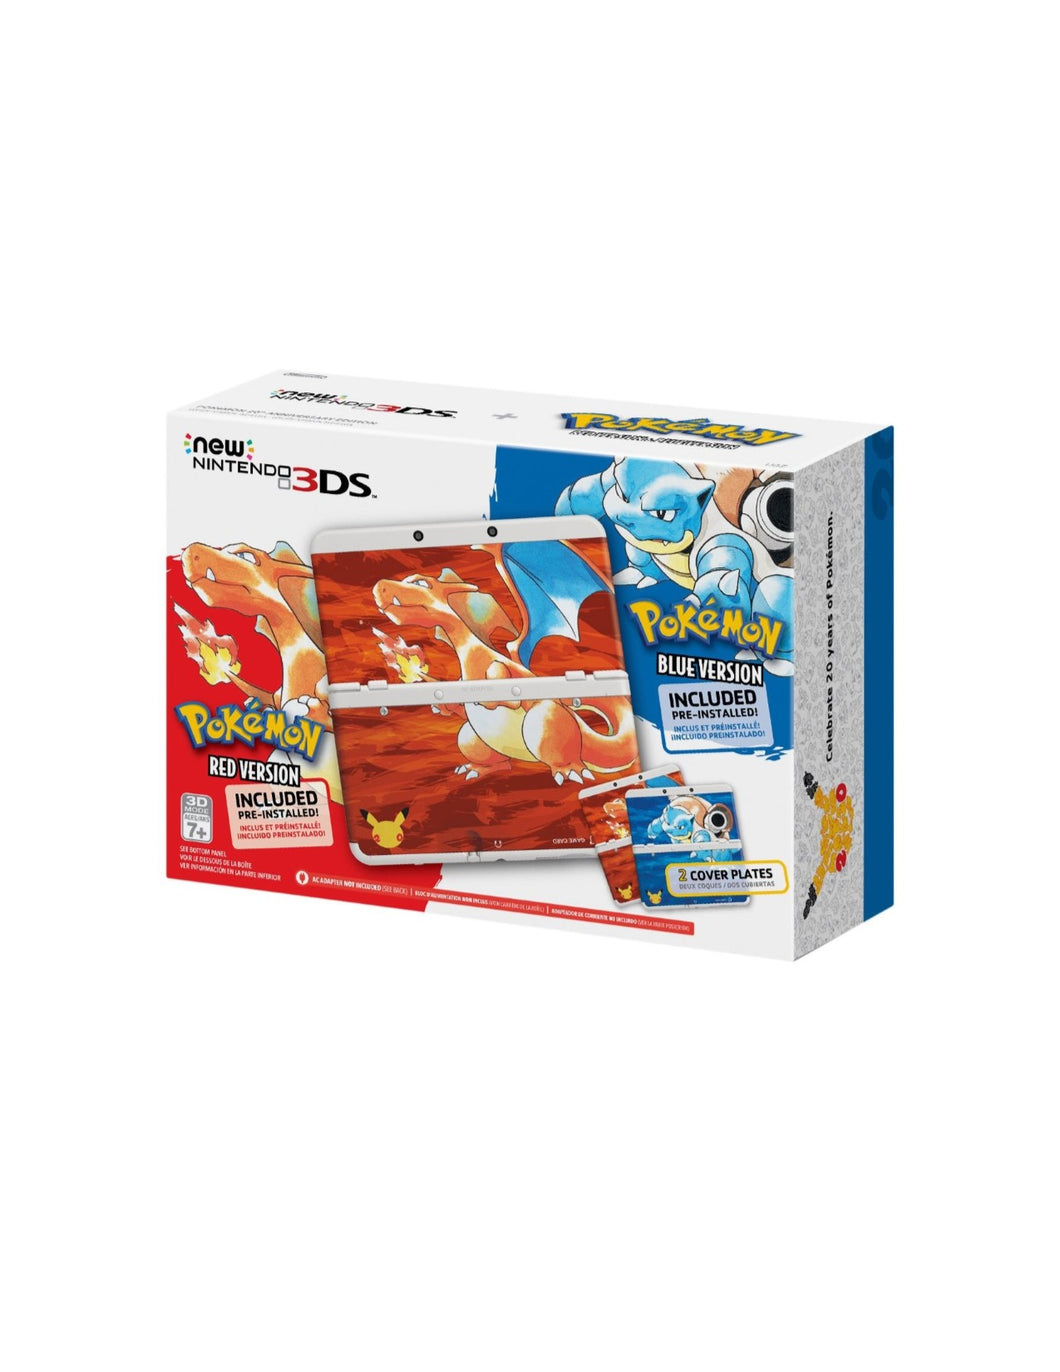 Pokemon 20th Anniversary New 3DS Red/Blue Bundle Images Surface Online